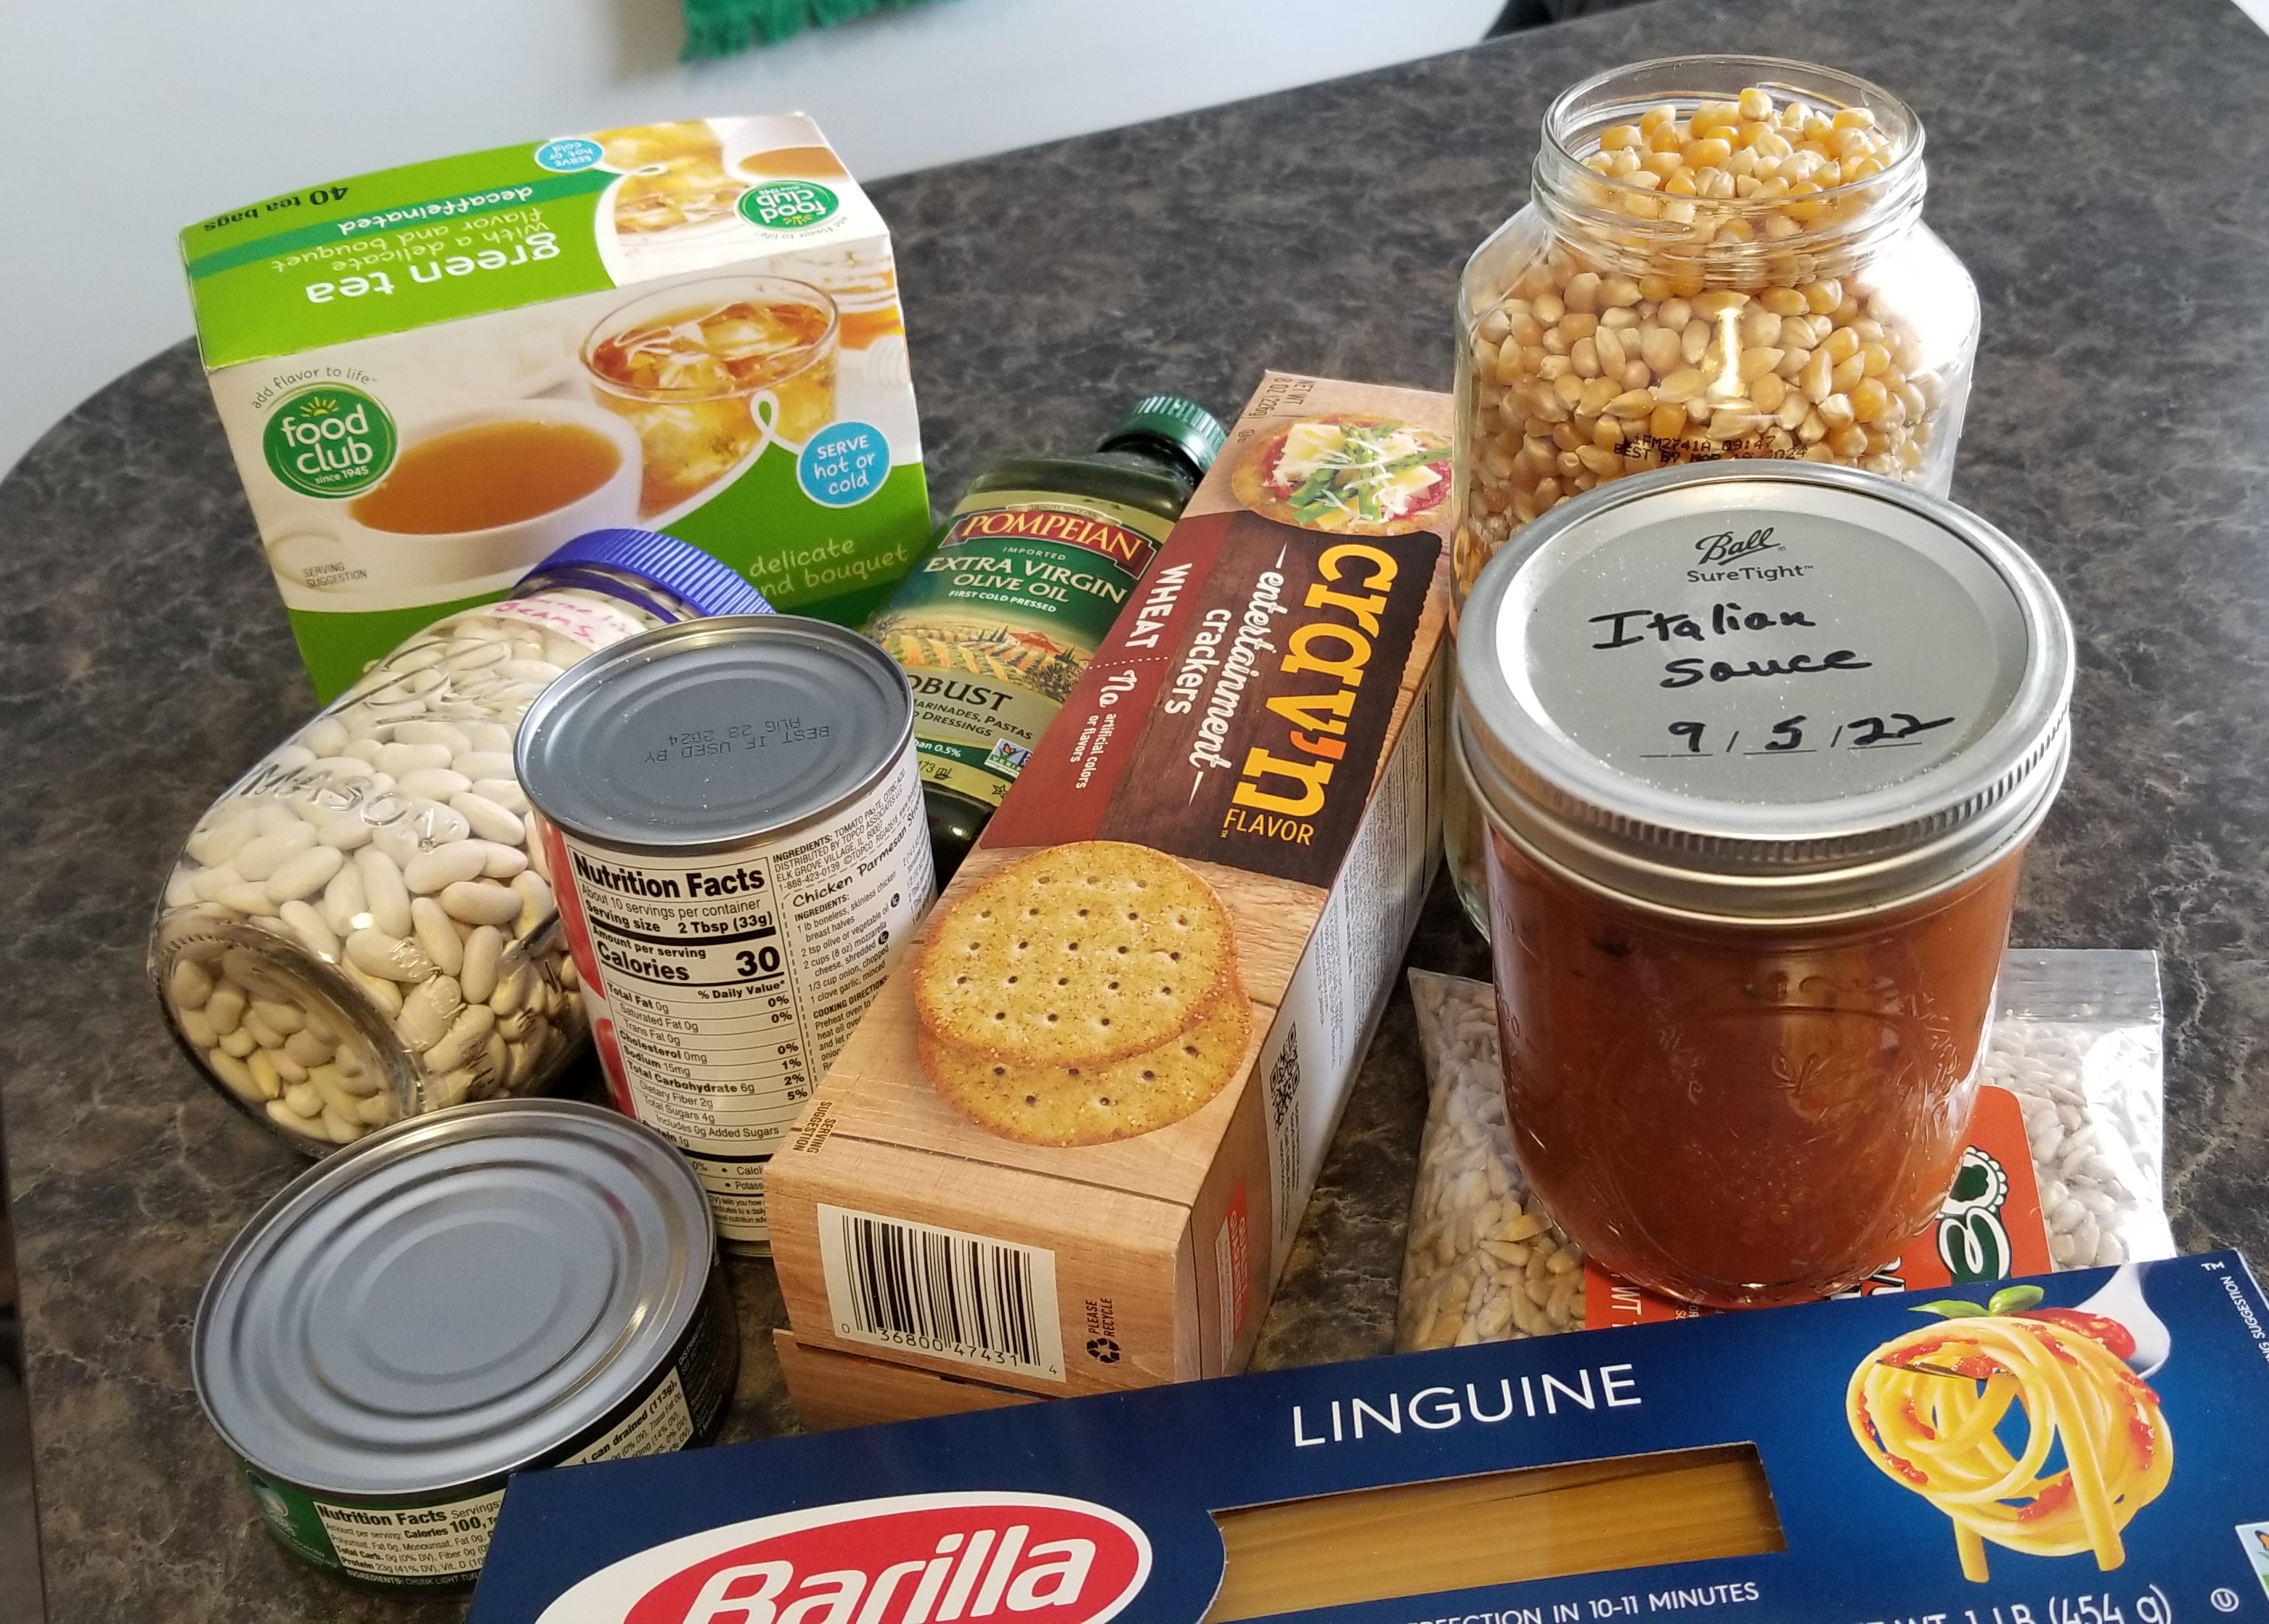 https://www.fspa.org/uploads/content_files/images/Pantry%20photo.jpg